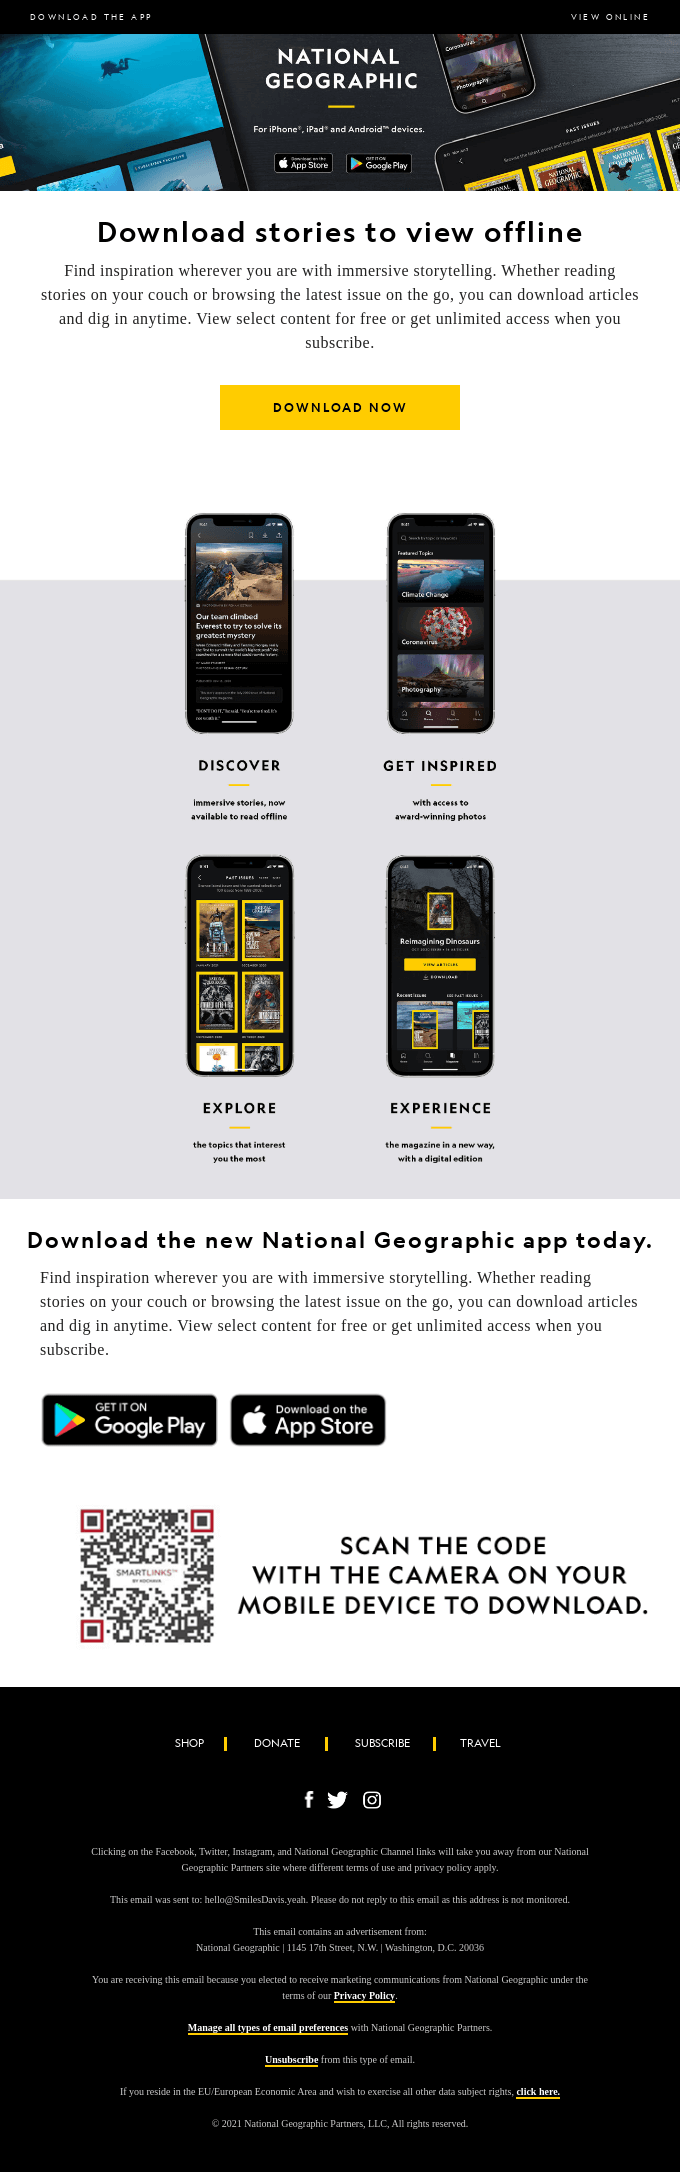 Experience the Nat Geo app today! Free to download + get unlimited access when you subscribe.